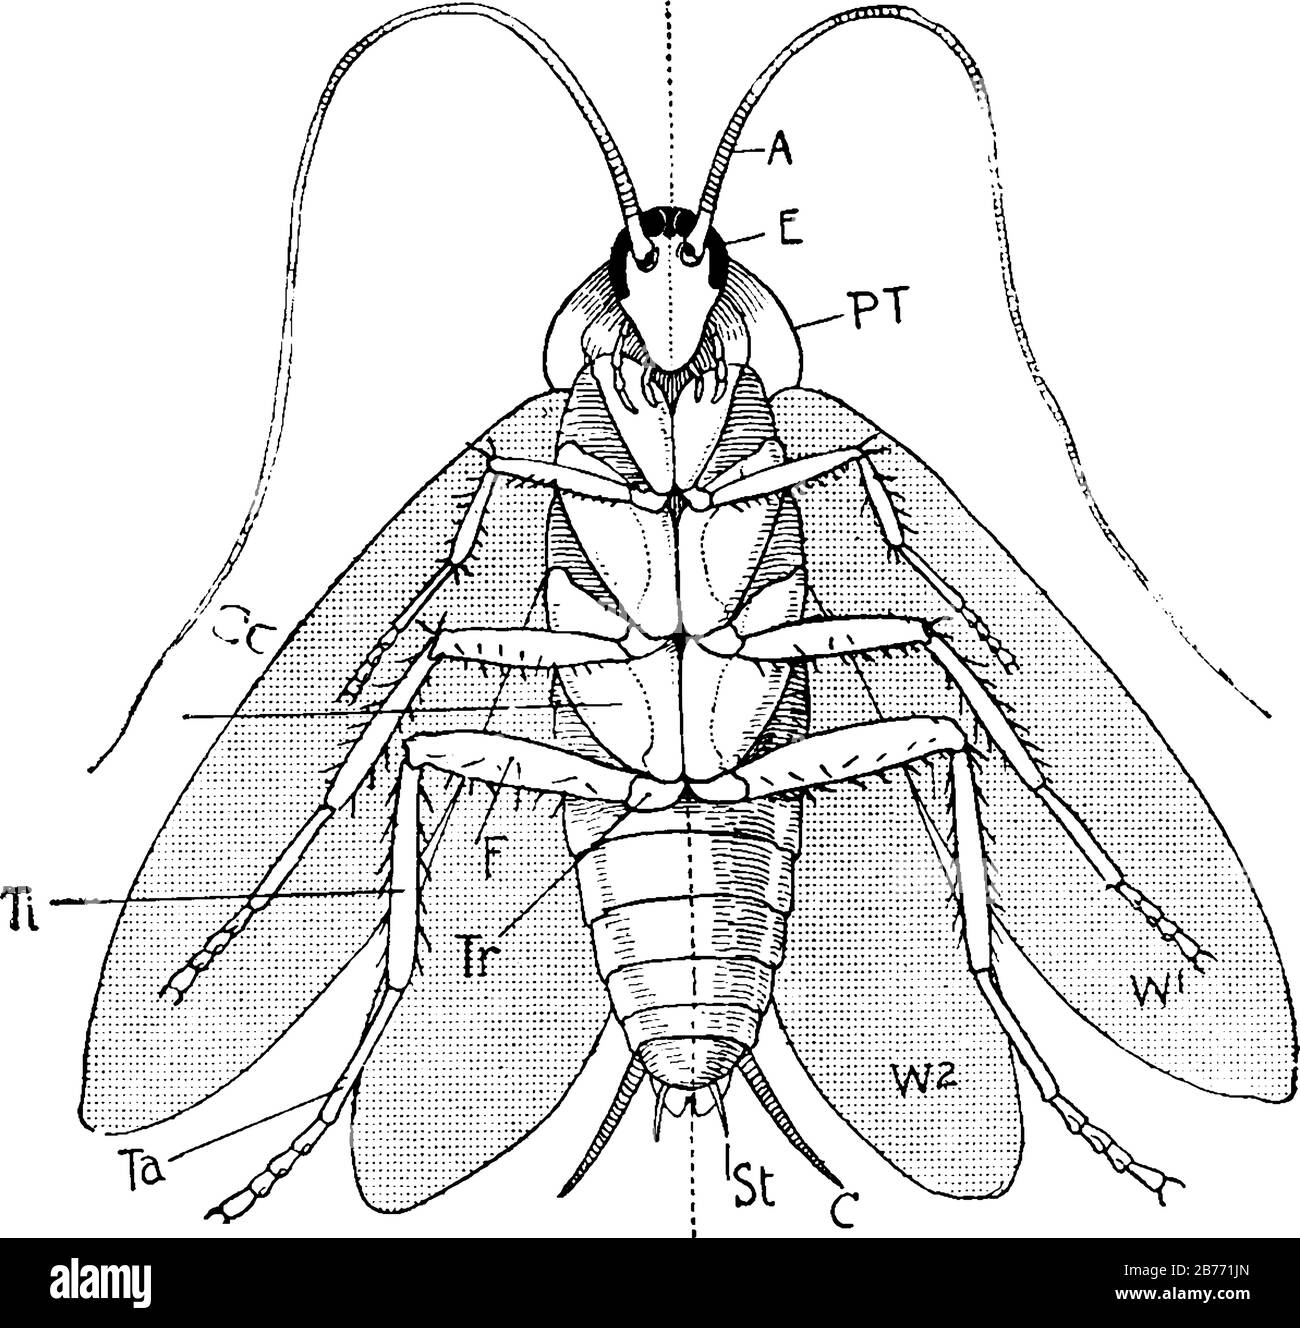 Labels: A, antennae; E, eye; P.T, prothorax; W1, first pair of wings; W2, second pair of wings; C, cercus; St, style; Co, coxa; Tr, trochanter; and ot Stock Vector